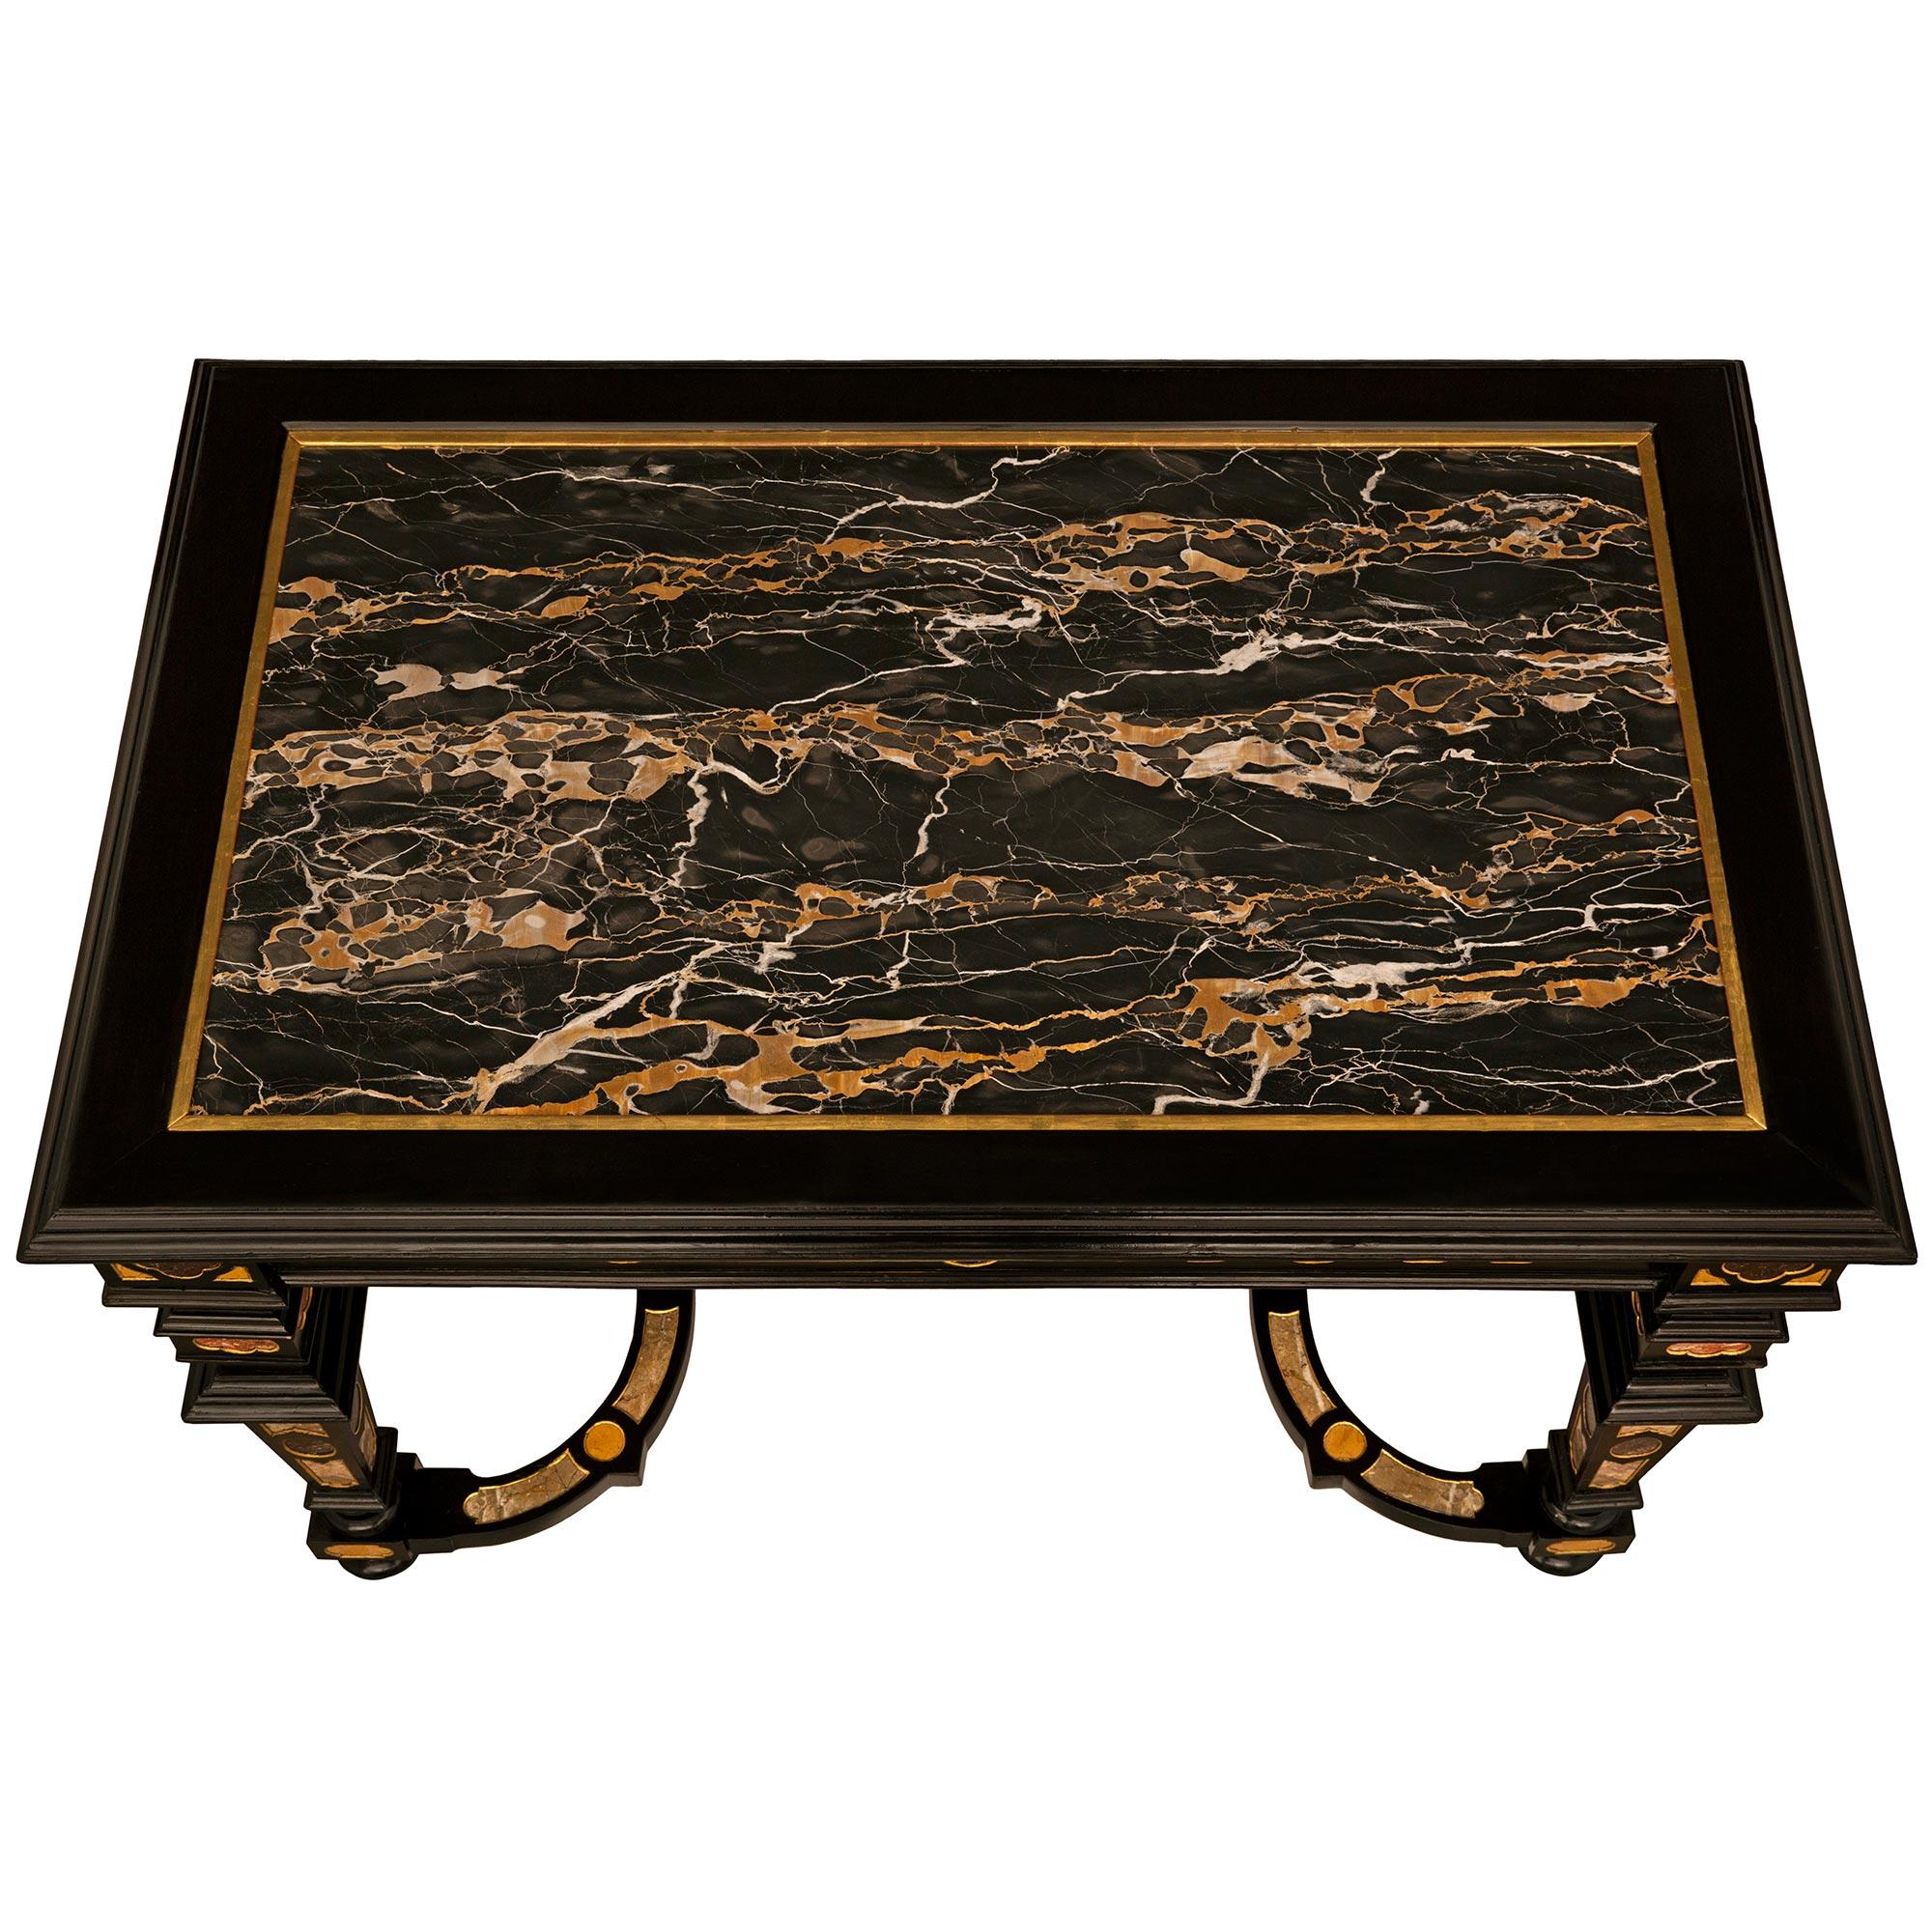 A striking and uniquely detailed Italian 19th century Baroque st. ebonized Fruitwood, Giltwood, Portoro marble, faux Porphyr, and Semi Precious Stone center table. This exquisite rectangular table is raised by handsome square tapered legs and topie